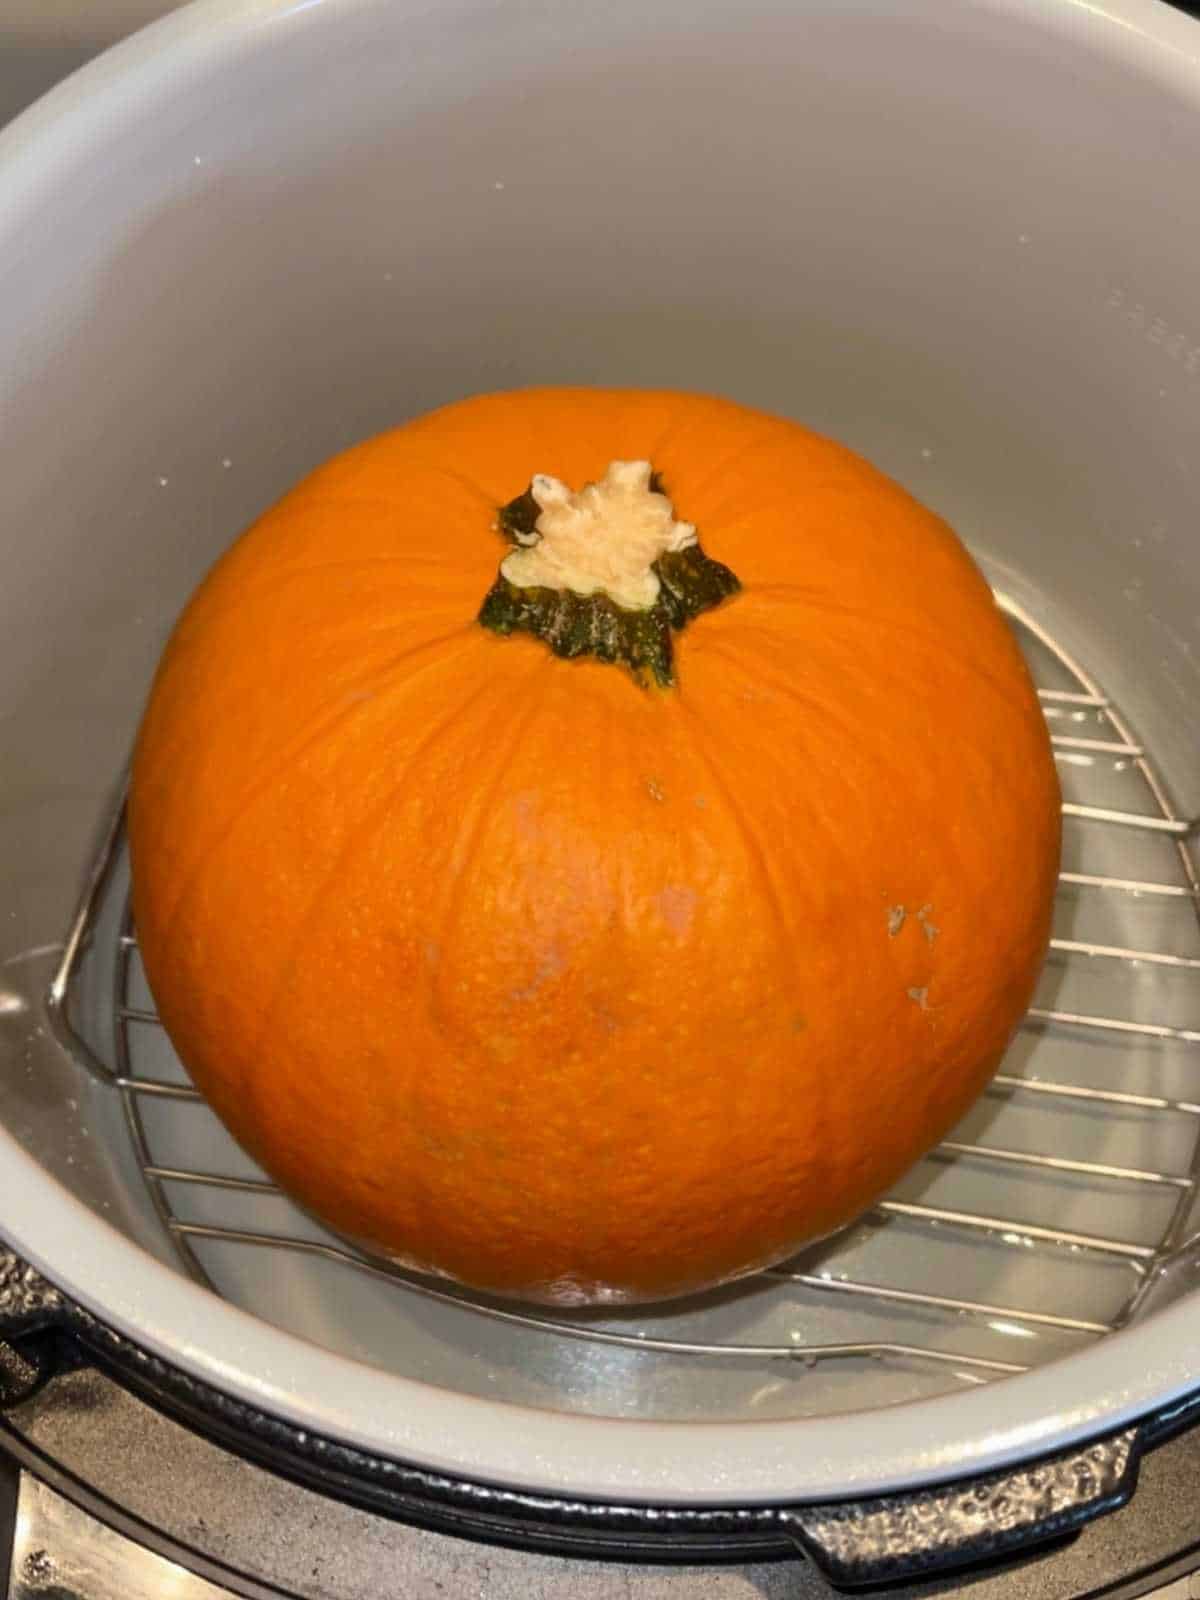 Photo of a whole pumpkin on the trivet inside a pressure cooker, seen from above